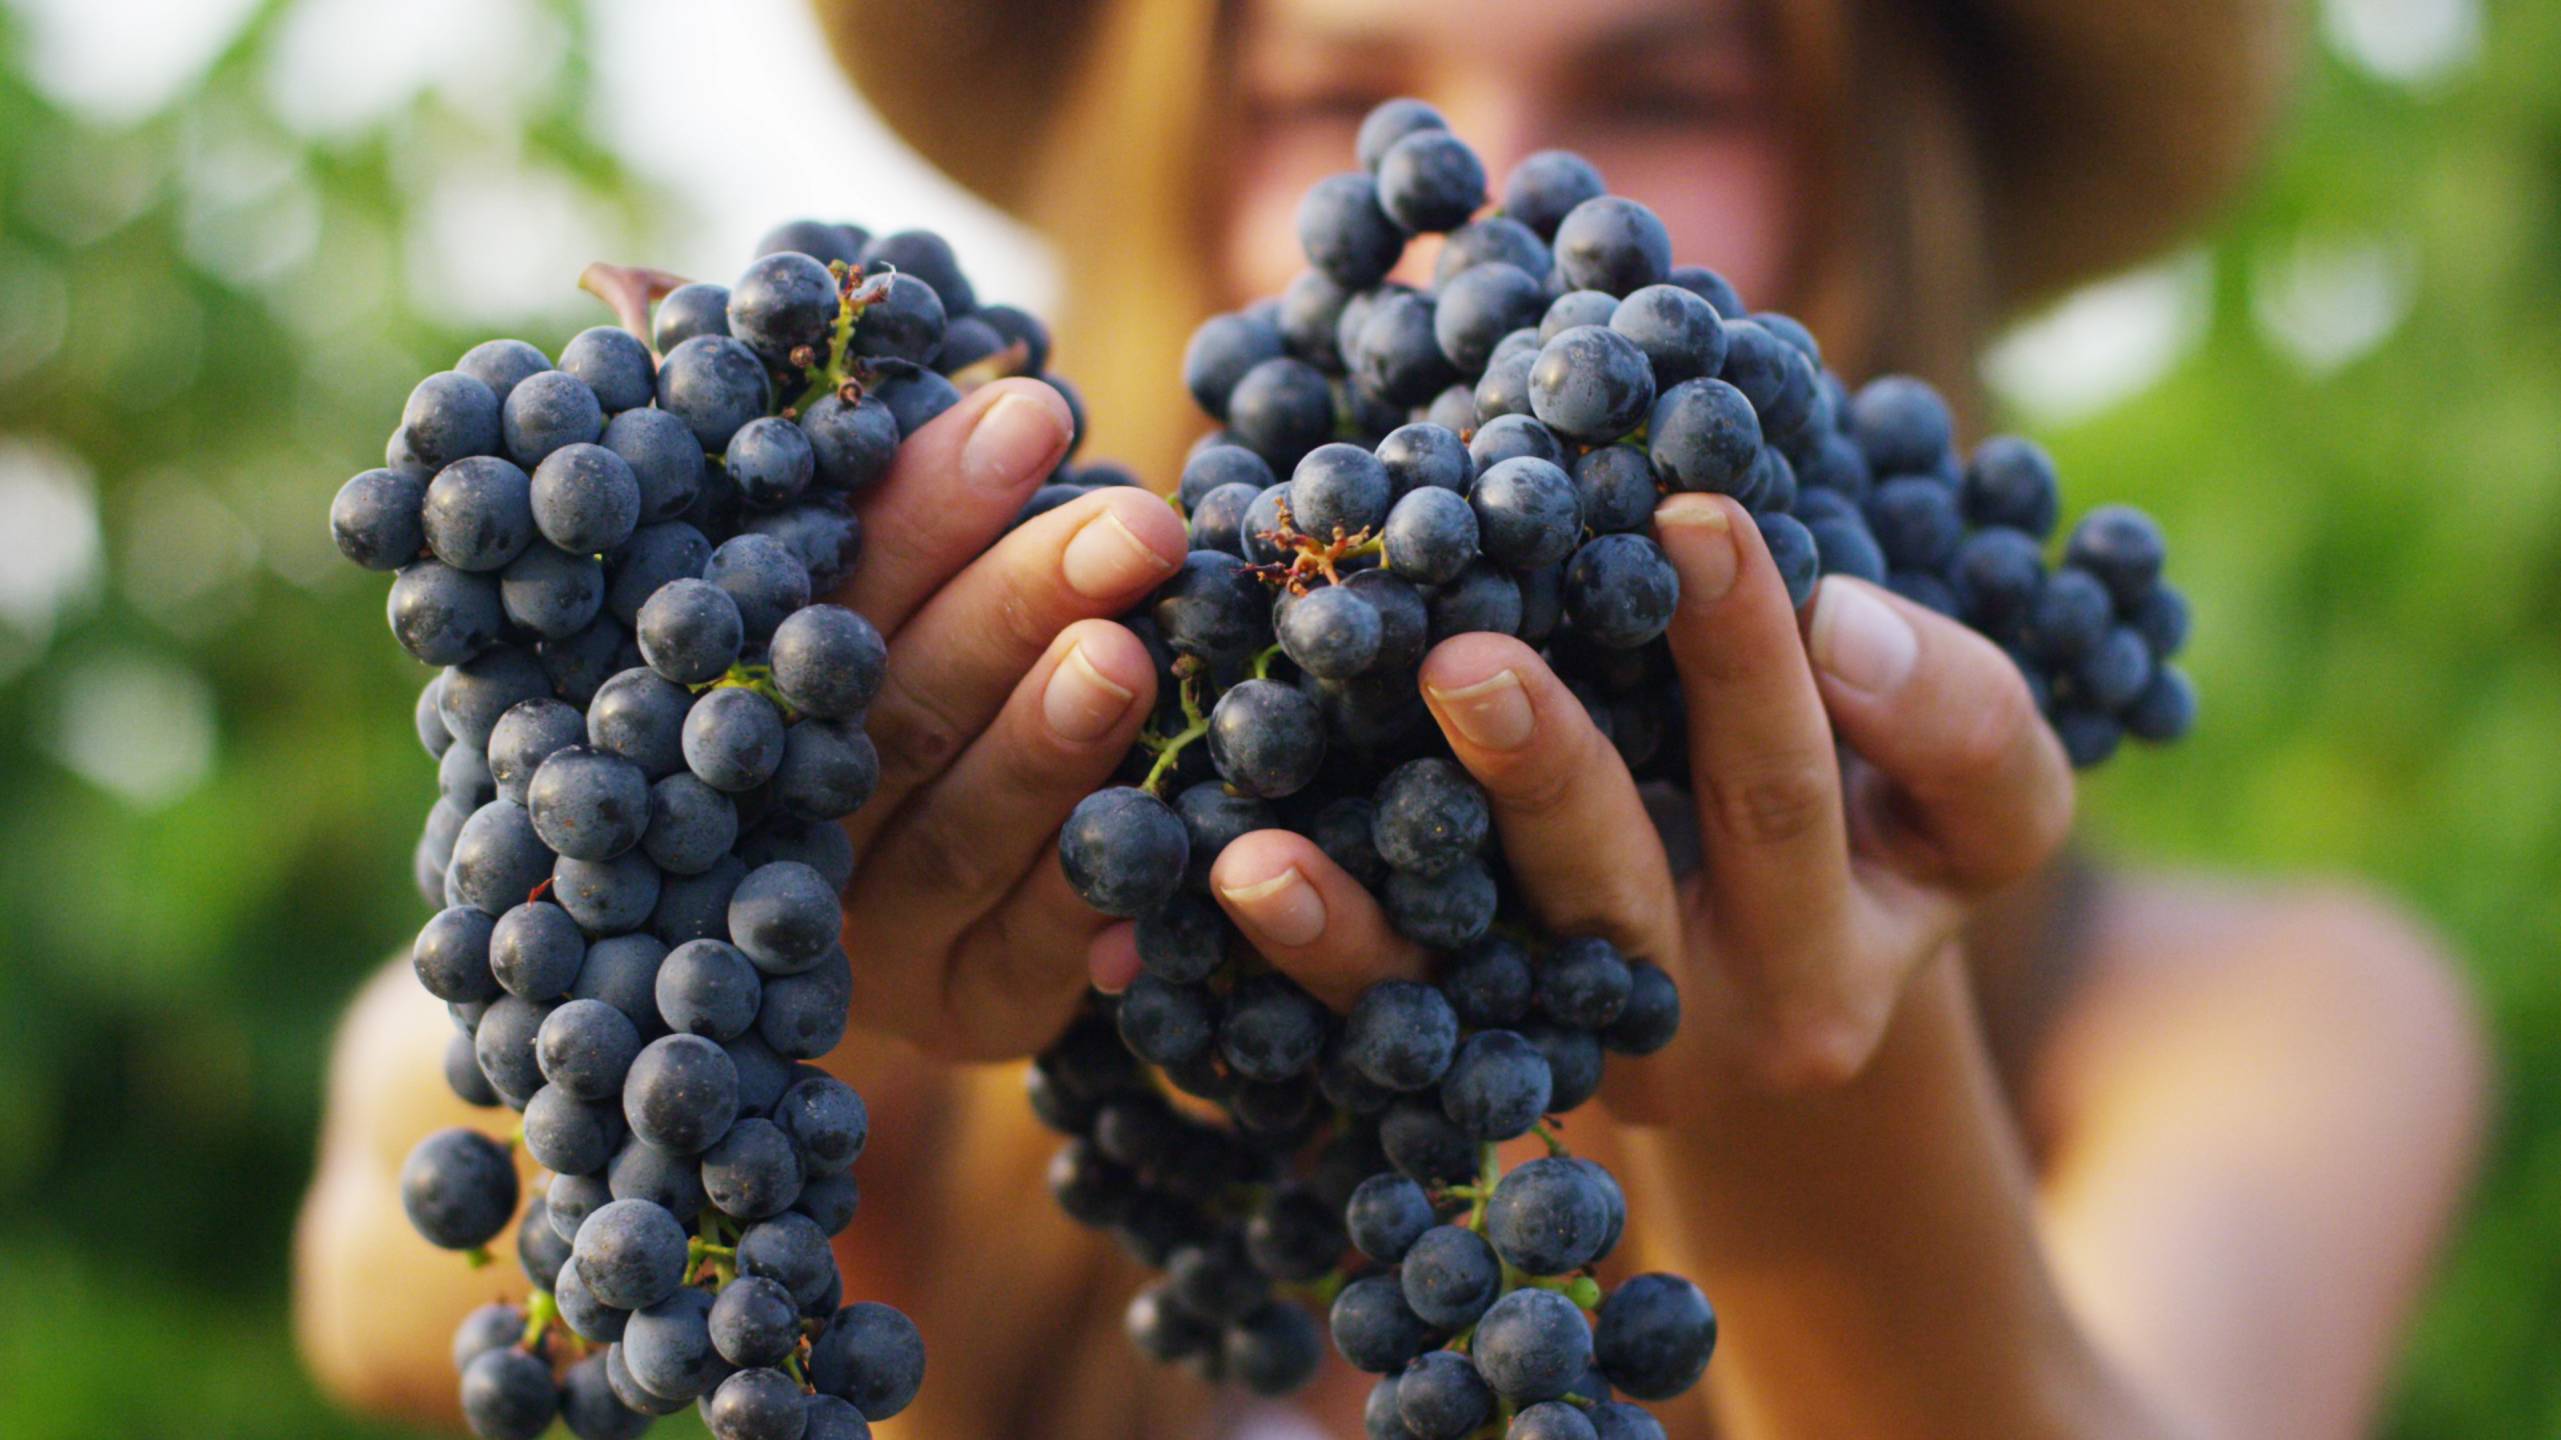 Close up of a grapes in a woman's hands to represent sustainable wine